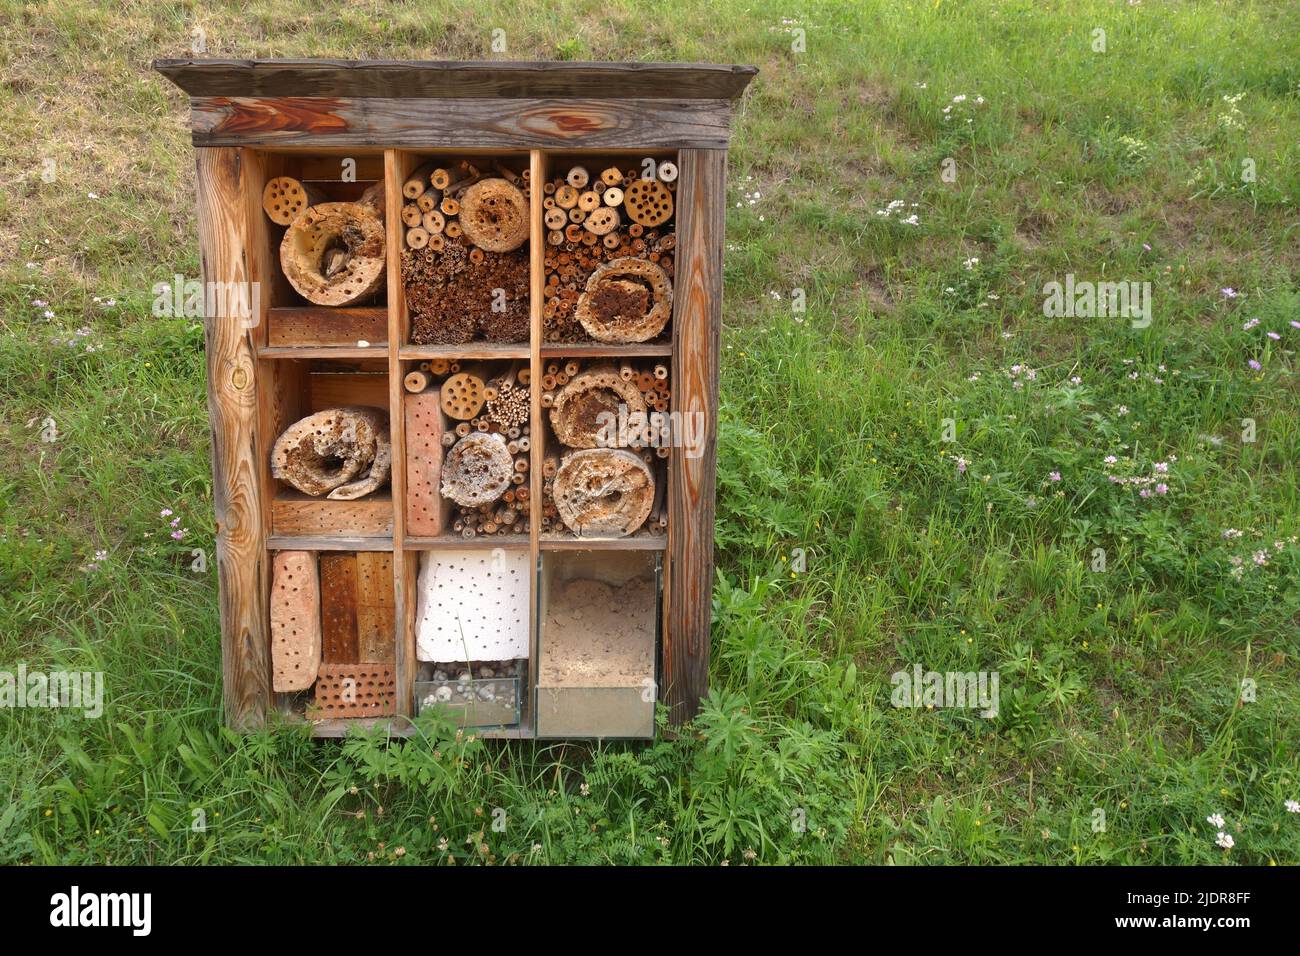 An insect hotel, also known as a bug hotel or insect house, is a manmade structure created to provide shelter for insects and preserve biodiversity Stock Photo